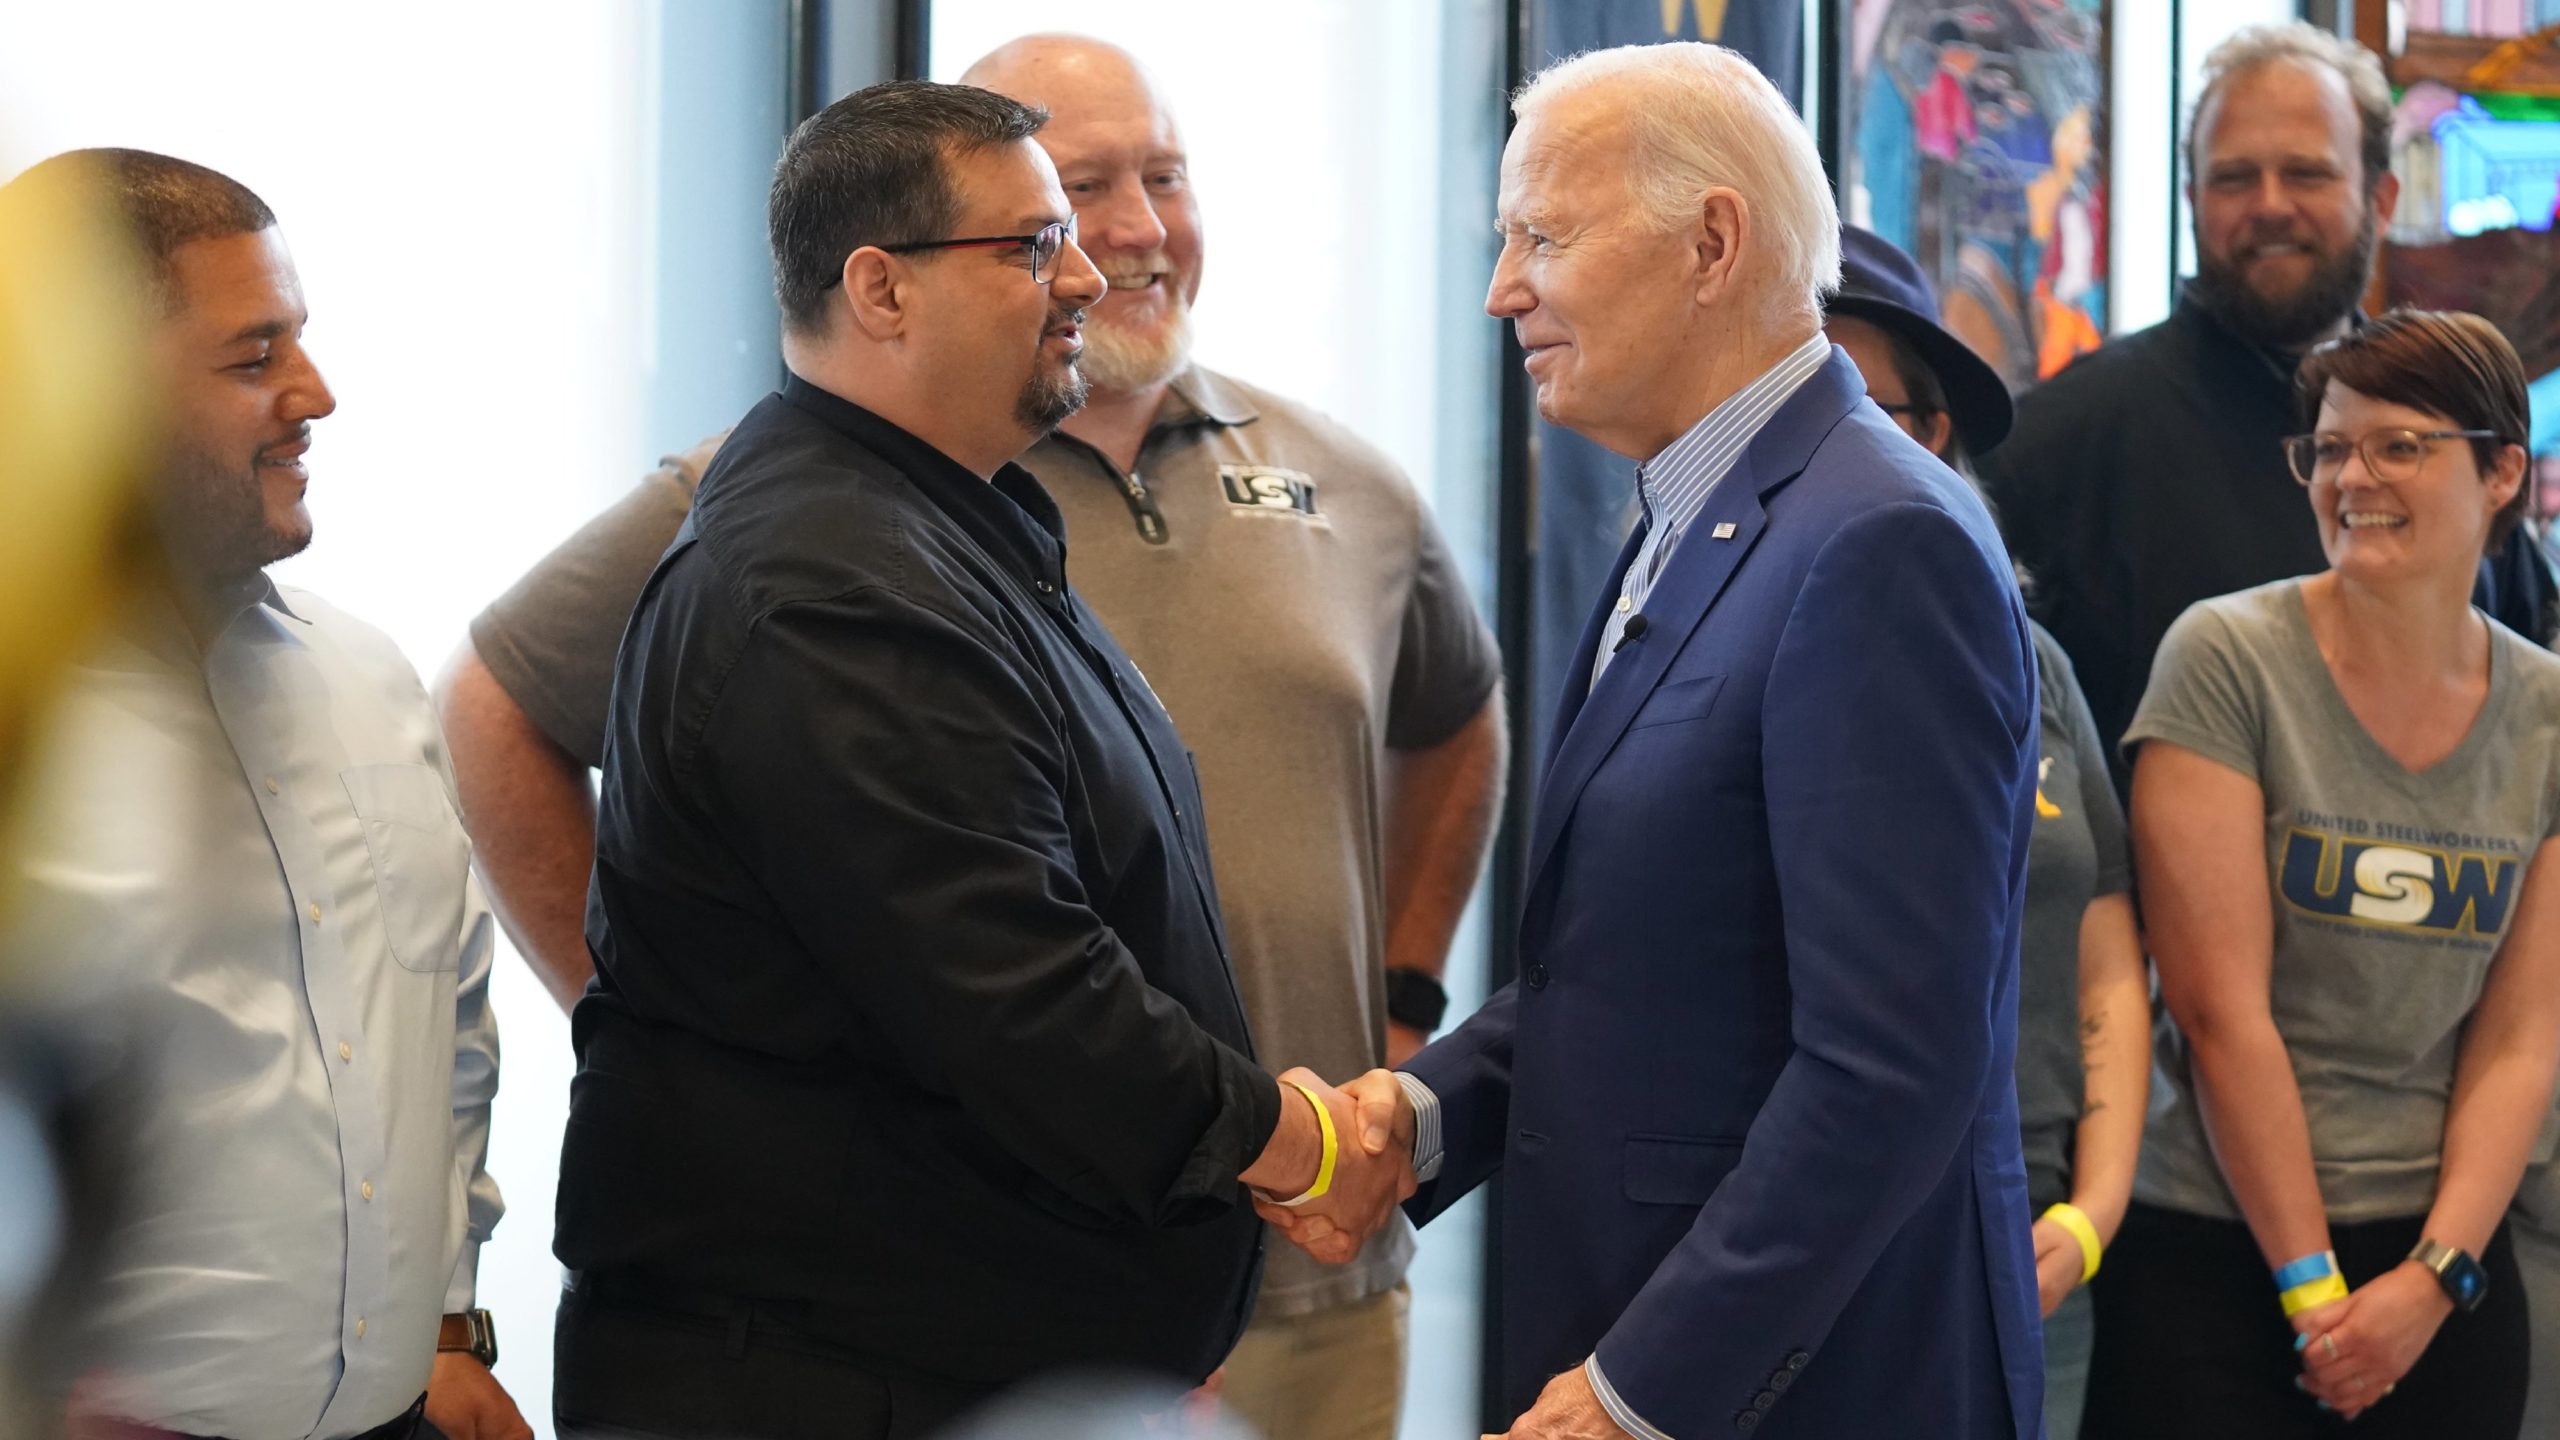 Biden Shows His Issues Are Getting Worse During Concerning Steel Worker Visit